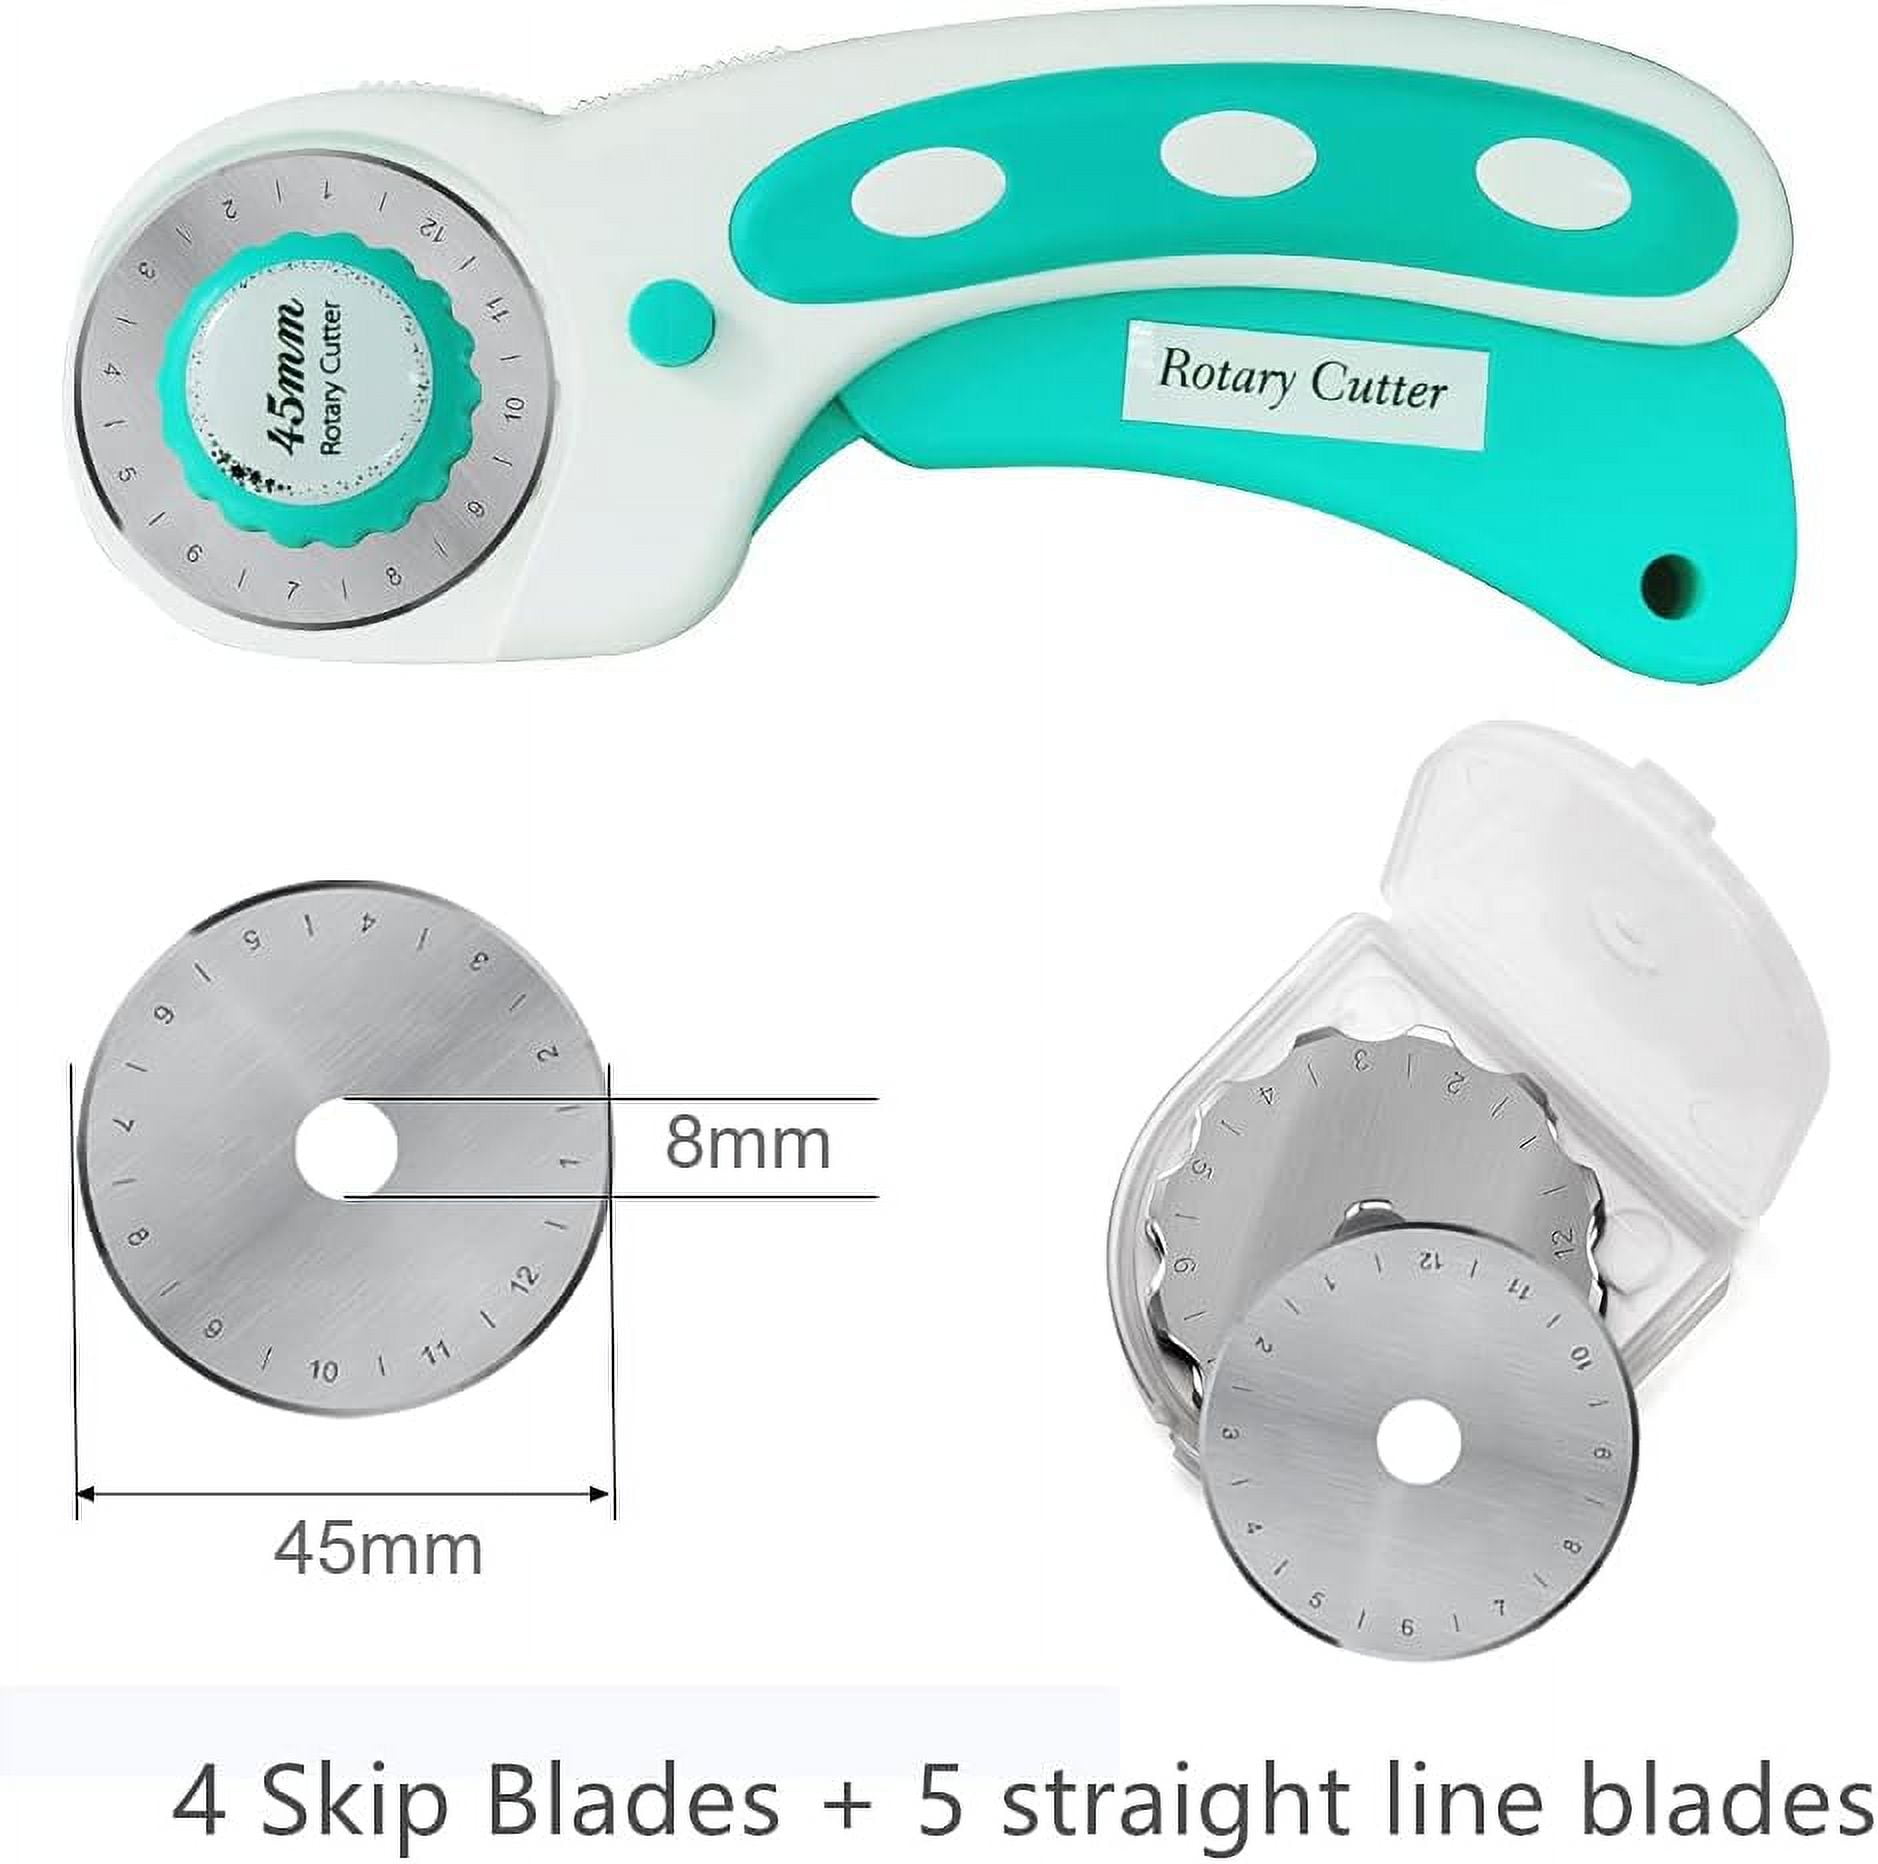 Elan Rotary Cutter for Fabric Blue, Fabric Rotary Cutter Sewing, Fabric  Cutters, as Blade Roller Cutter for Fabric Cutter, Rotary Cutter Blades  45mm